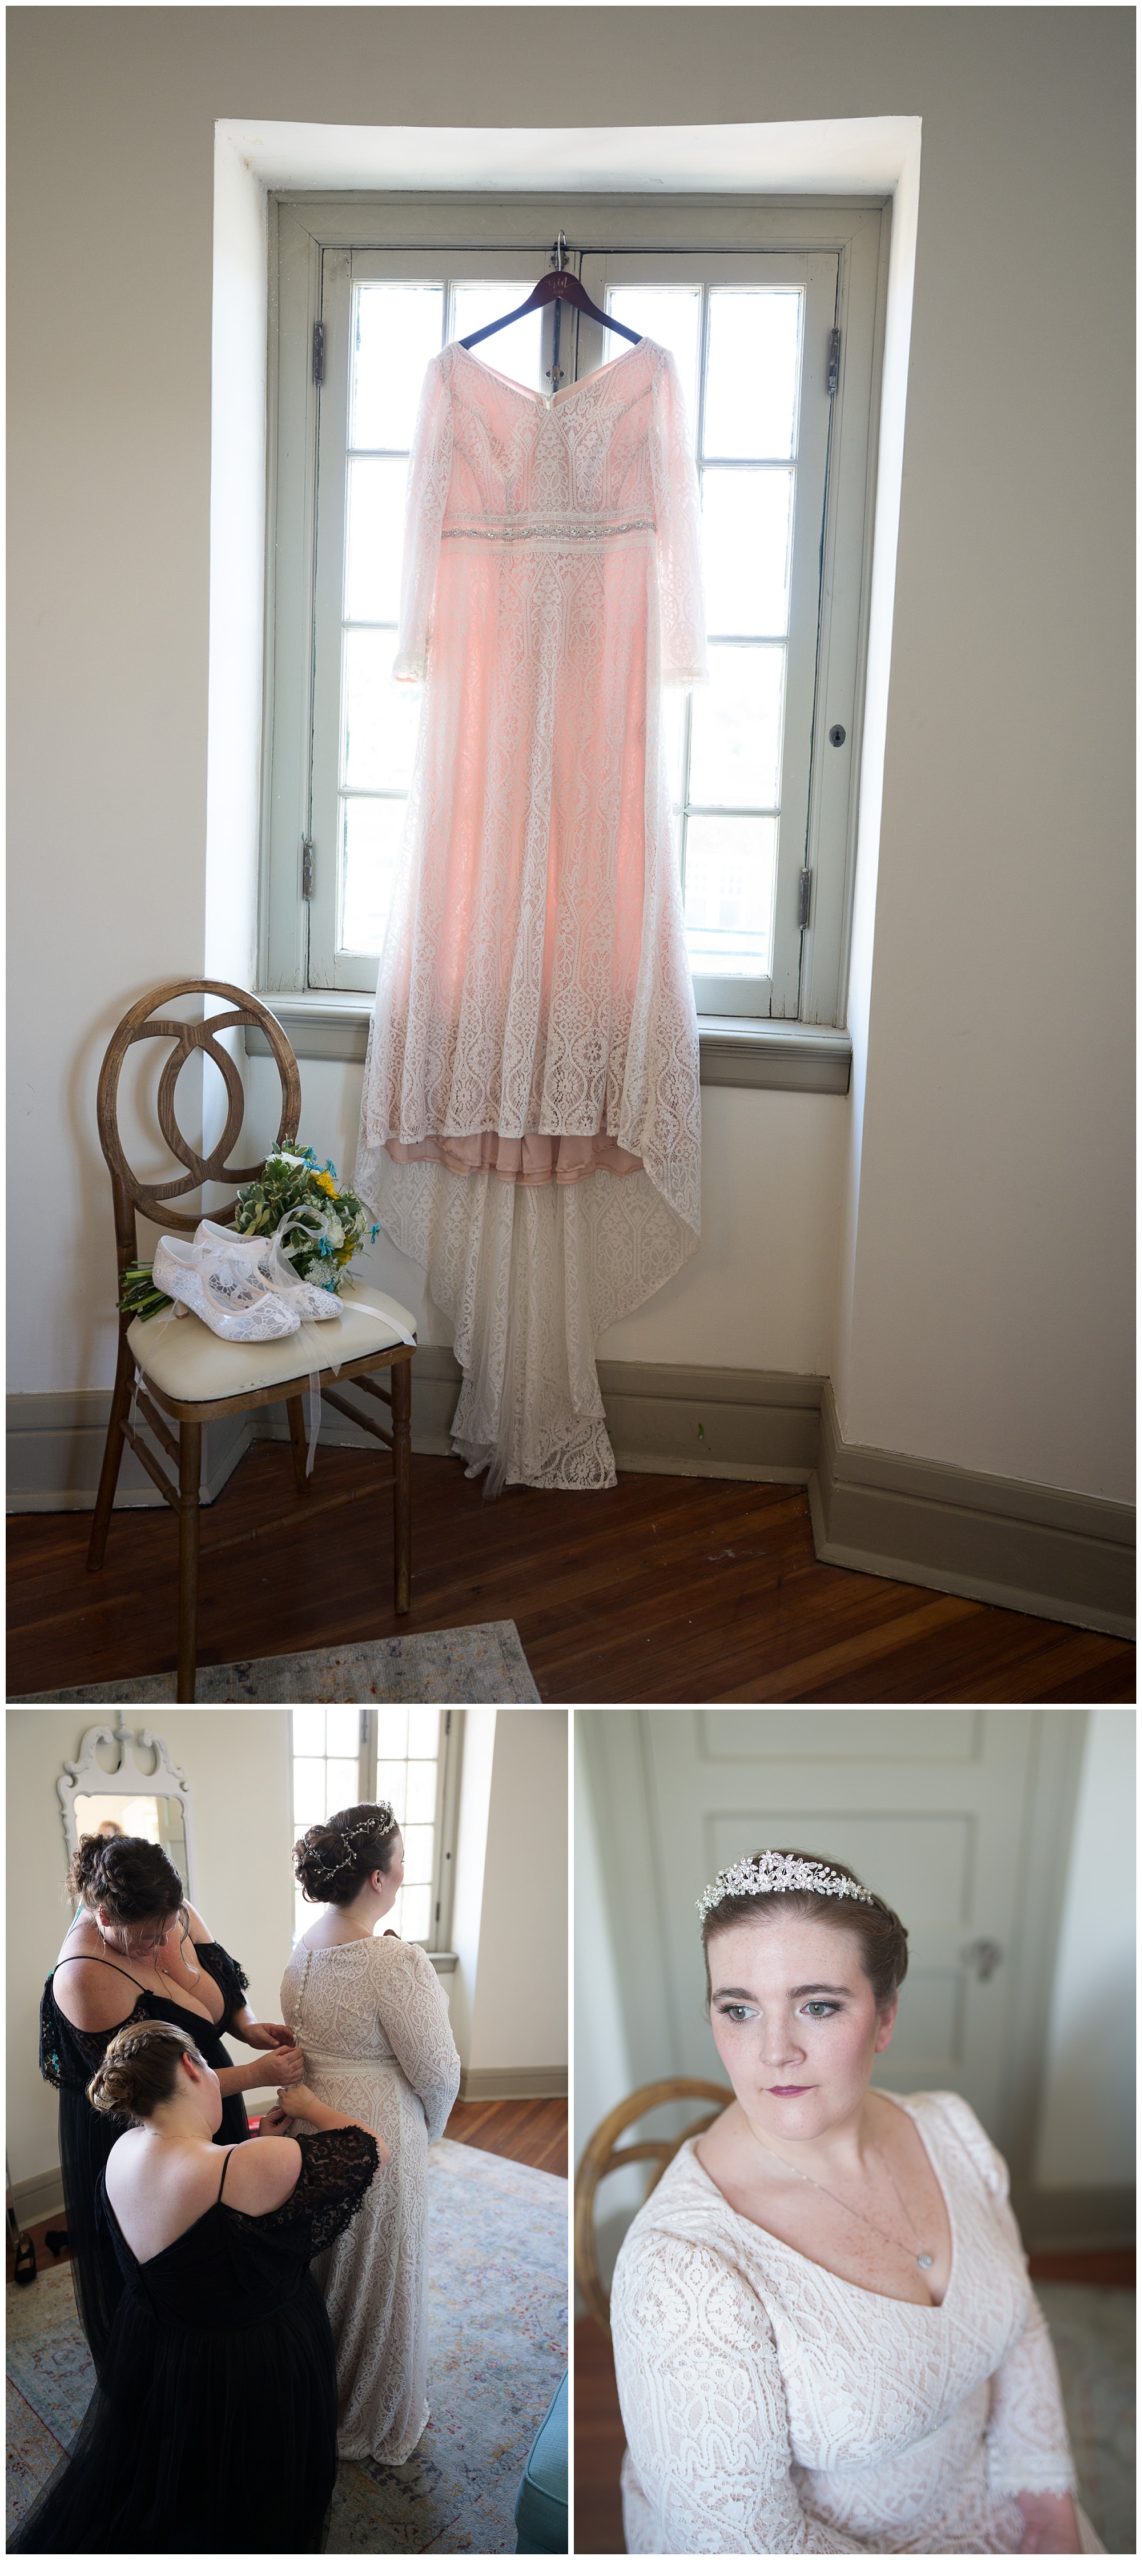 Long sleeve lace gown hanging in a window | Bride with bridesmaids